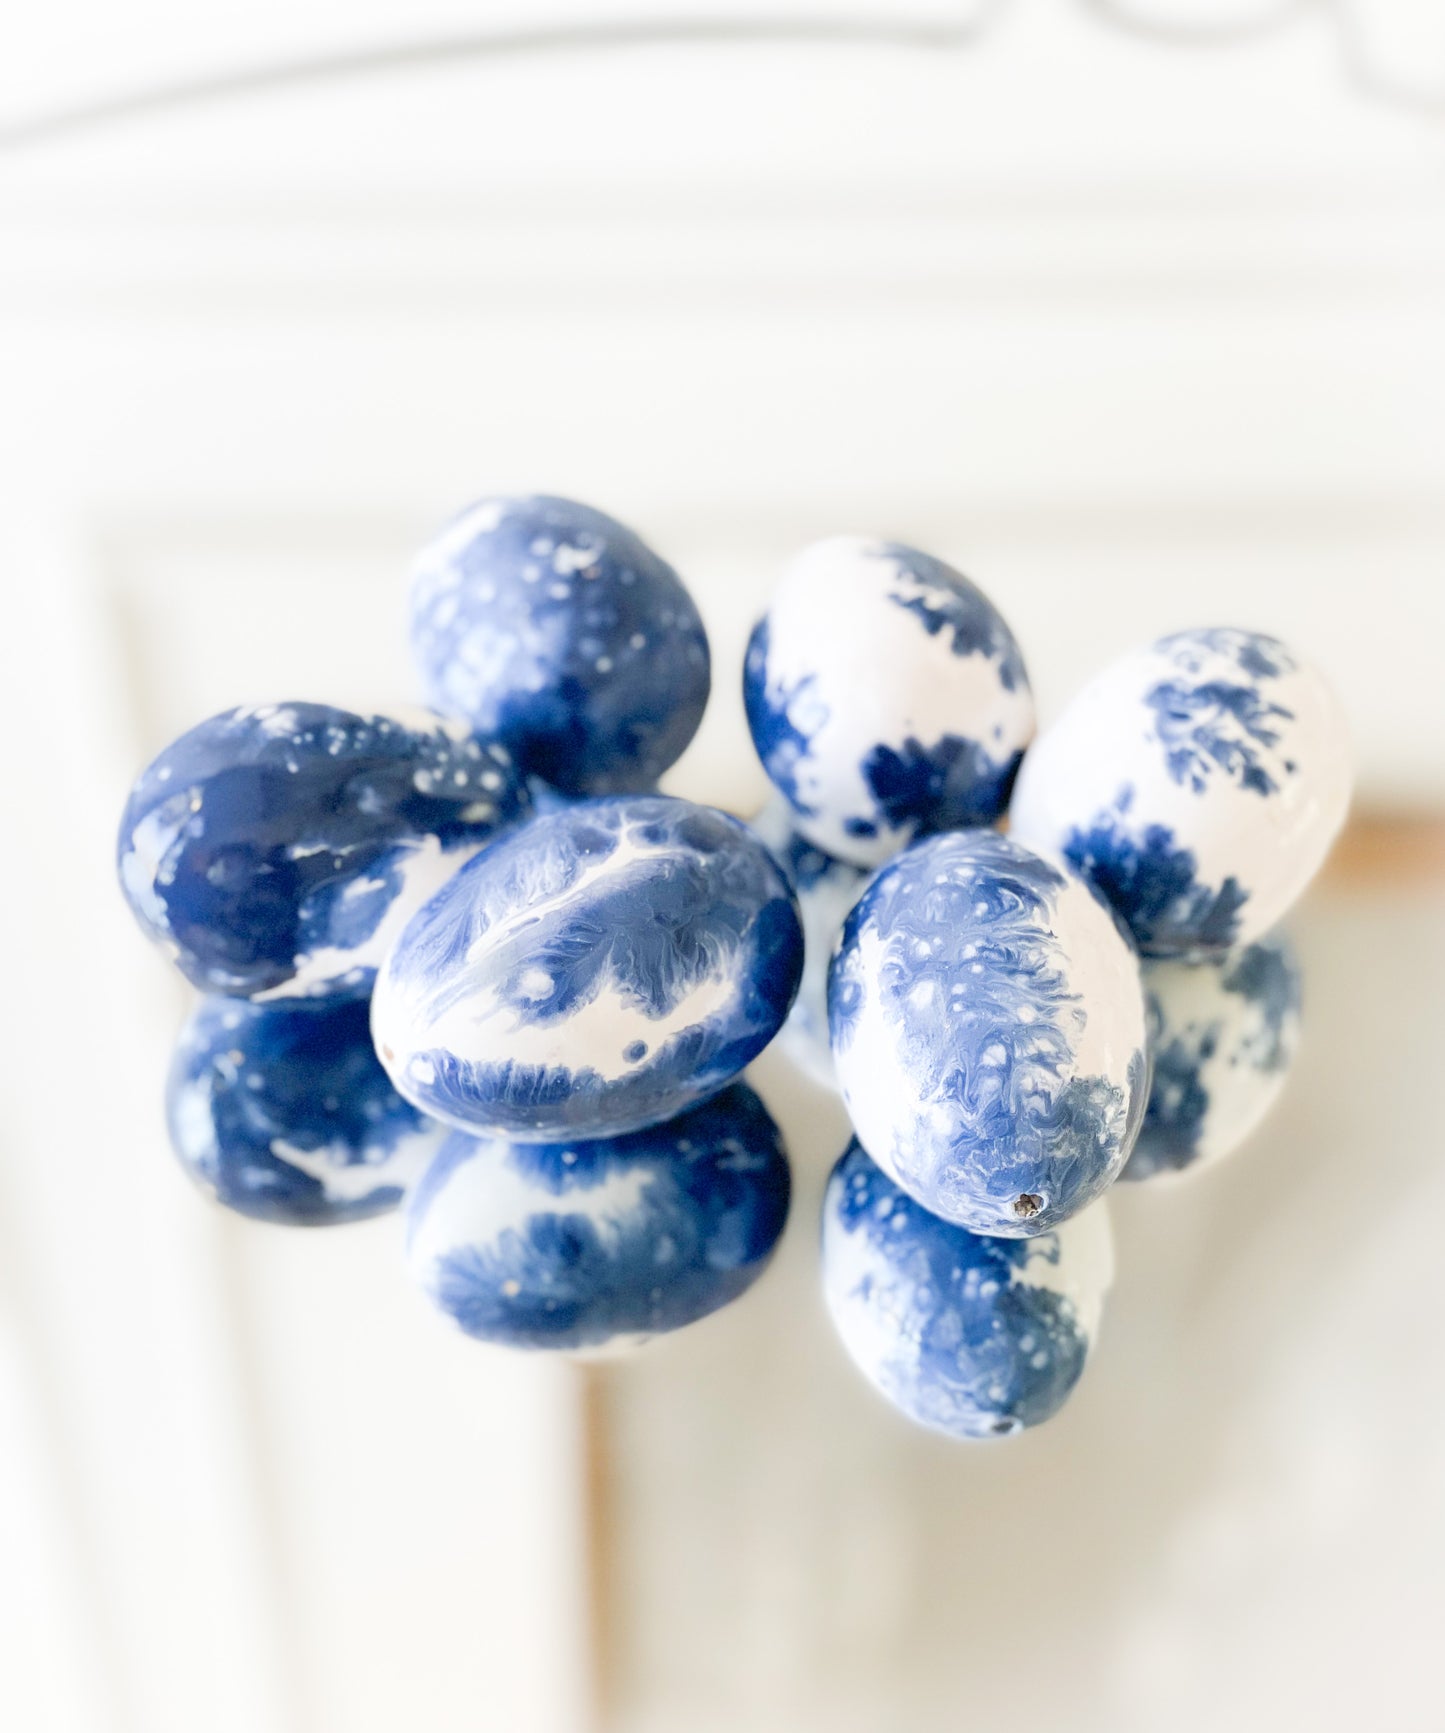 Box Of 6 Blue And White Terracotta Bloomsbury Eggs